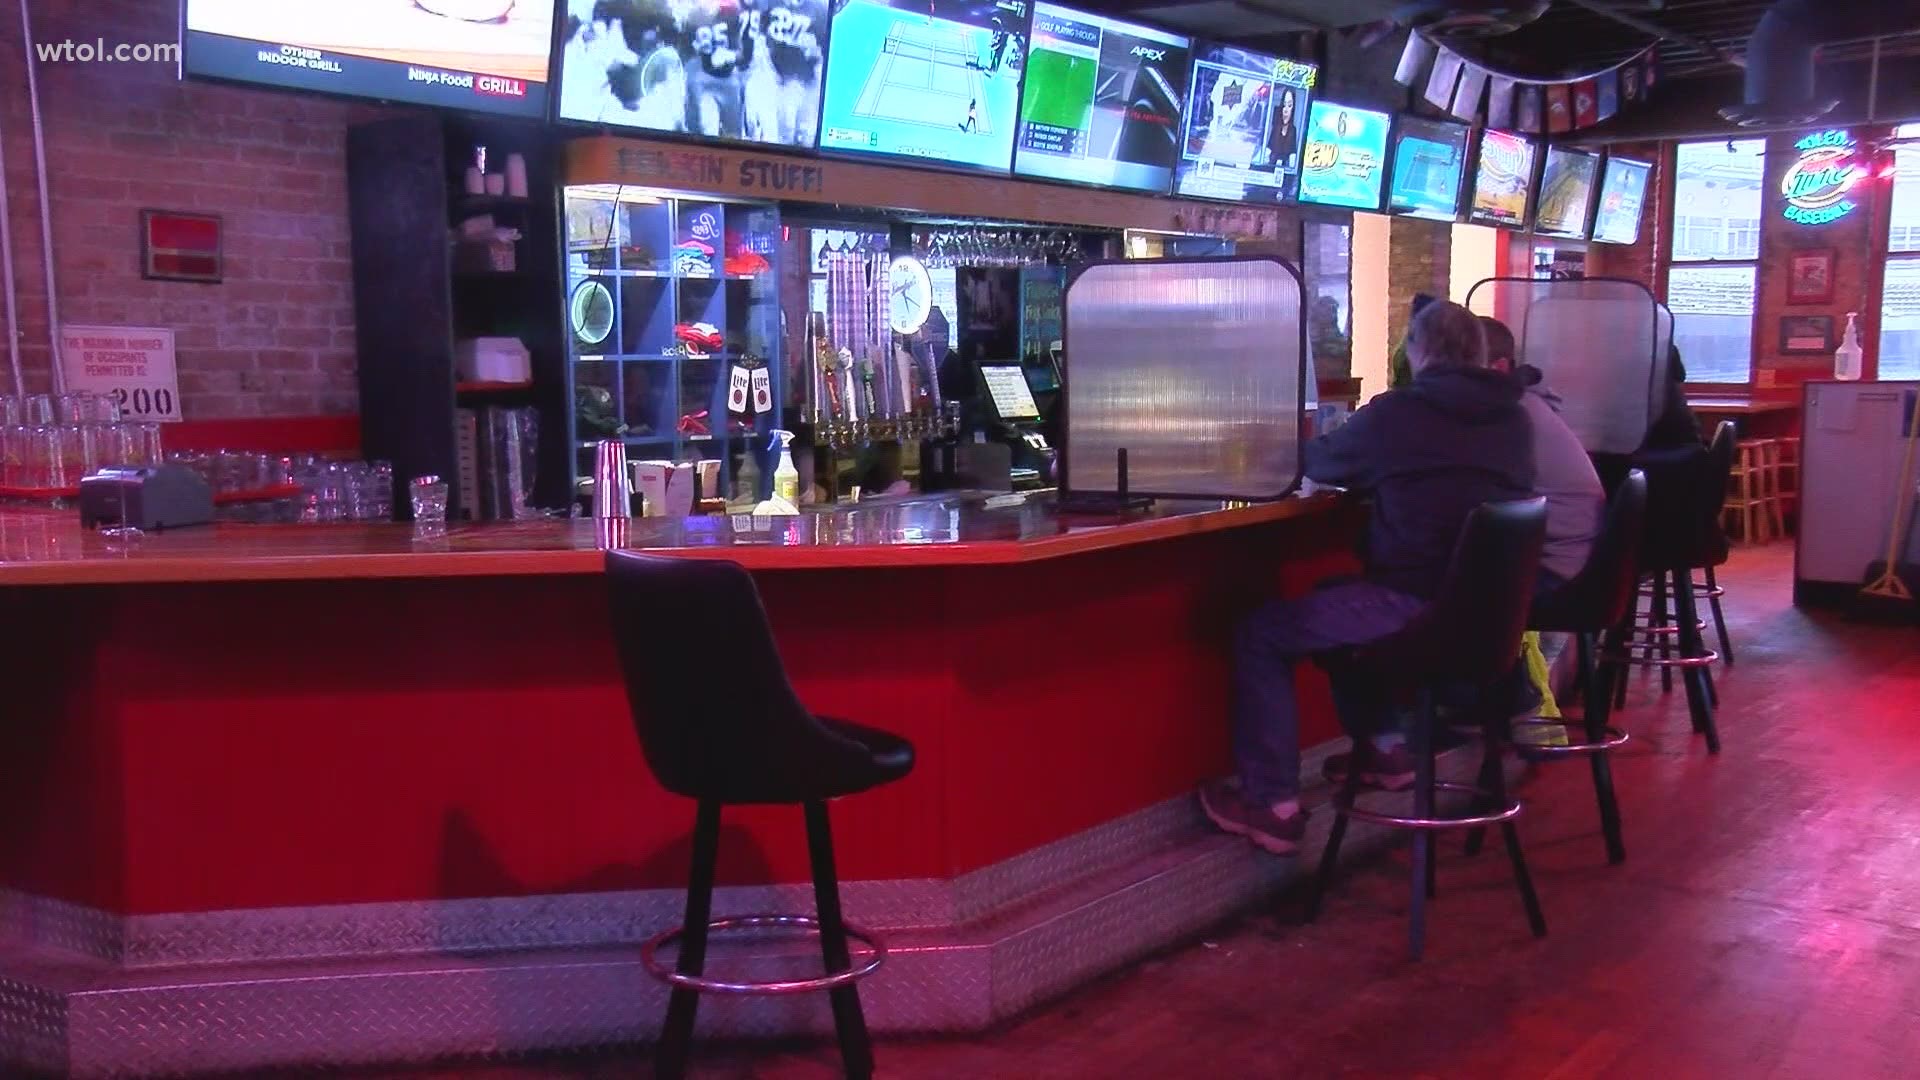 Fricker's is already hiring more employees and expecting large crowds to flock downtown once again.